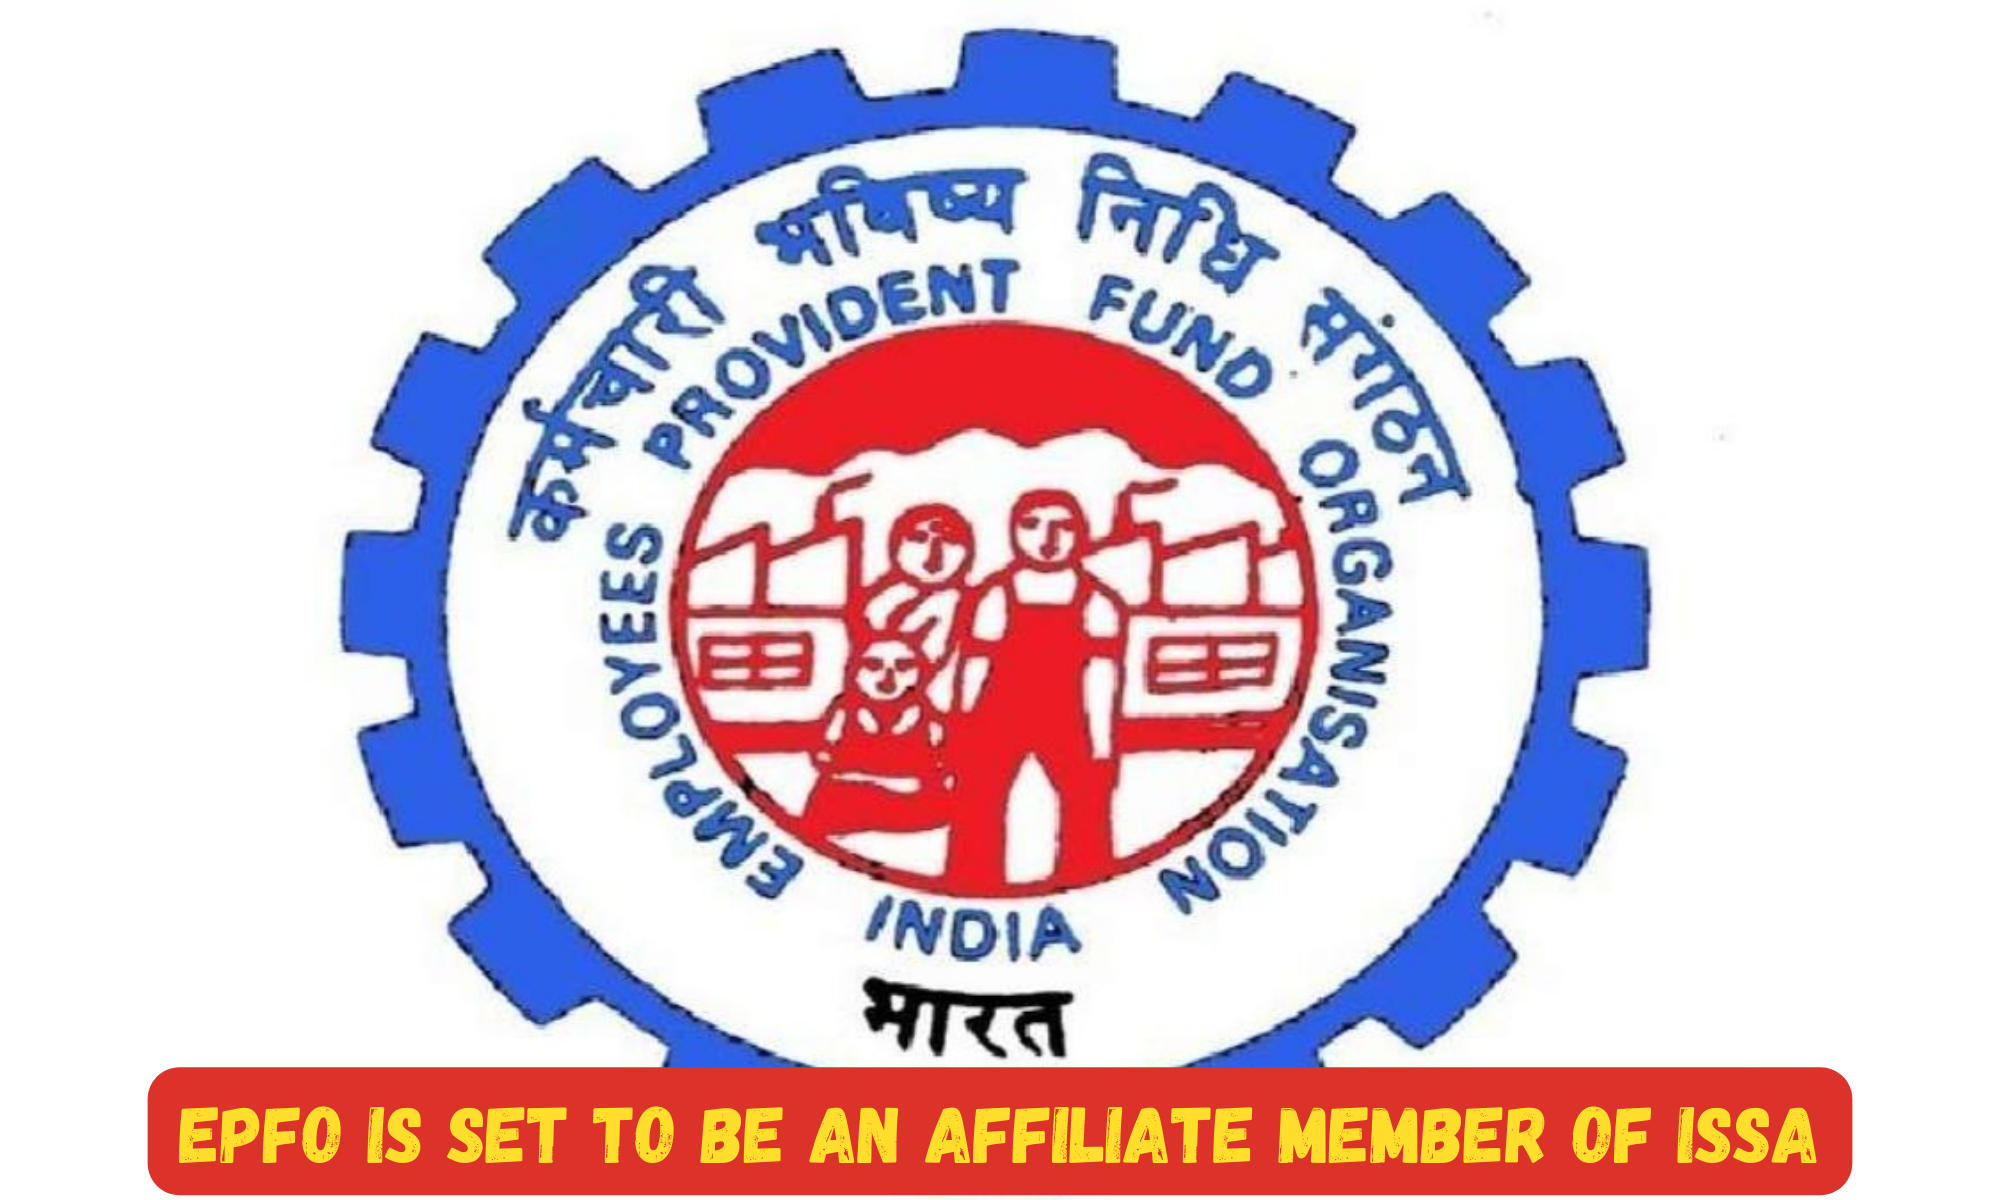 EPFO is set to be an affiliate member of ISSA